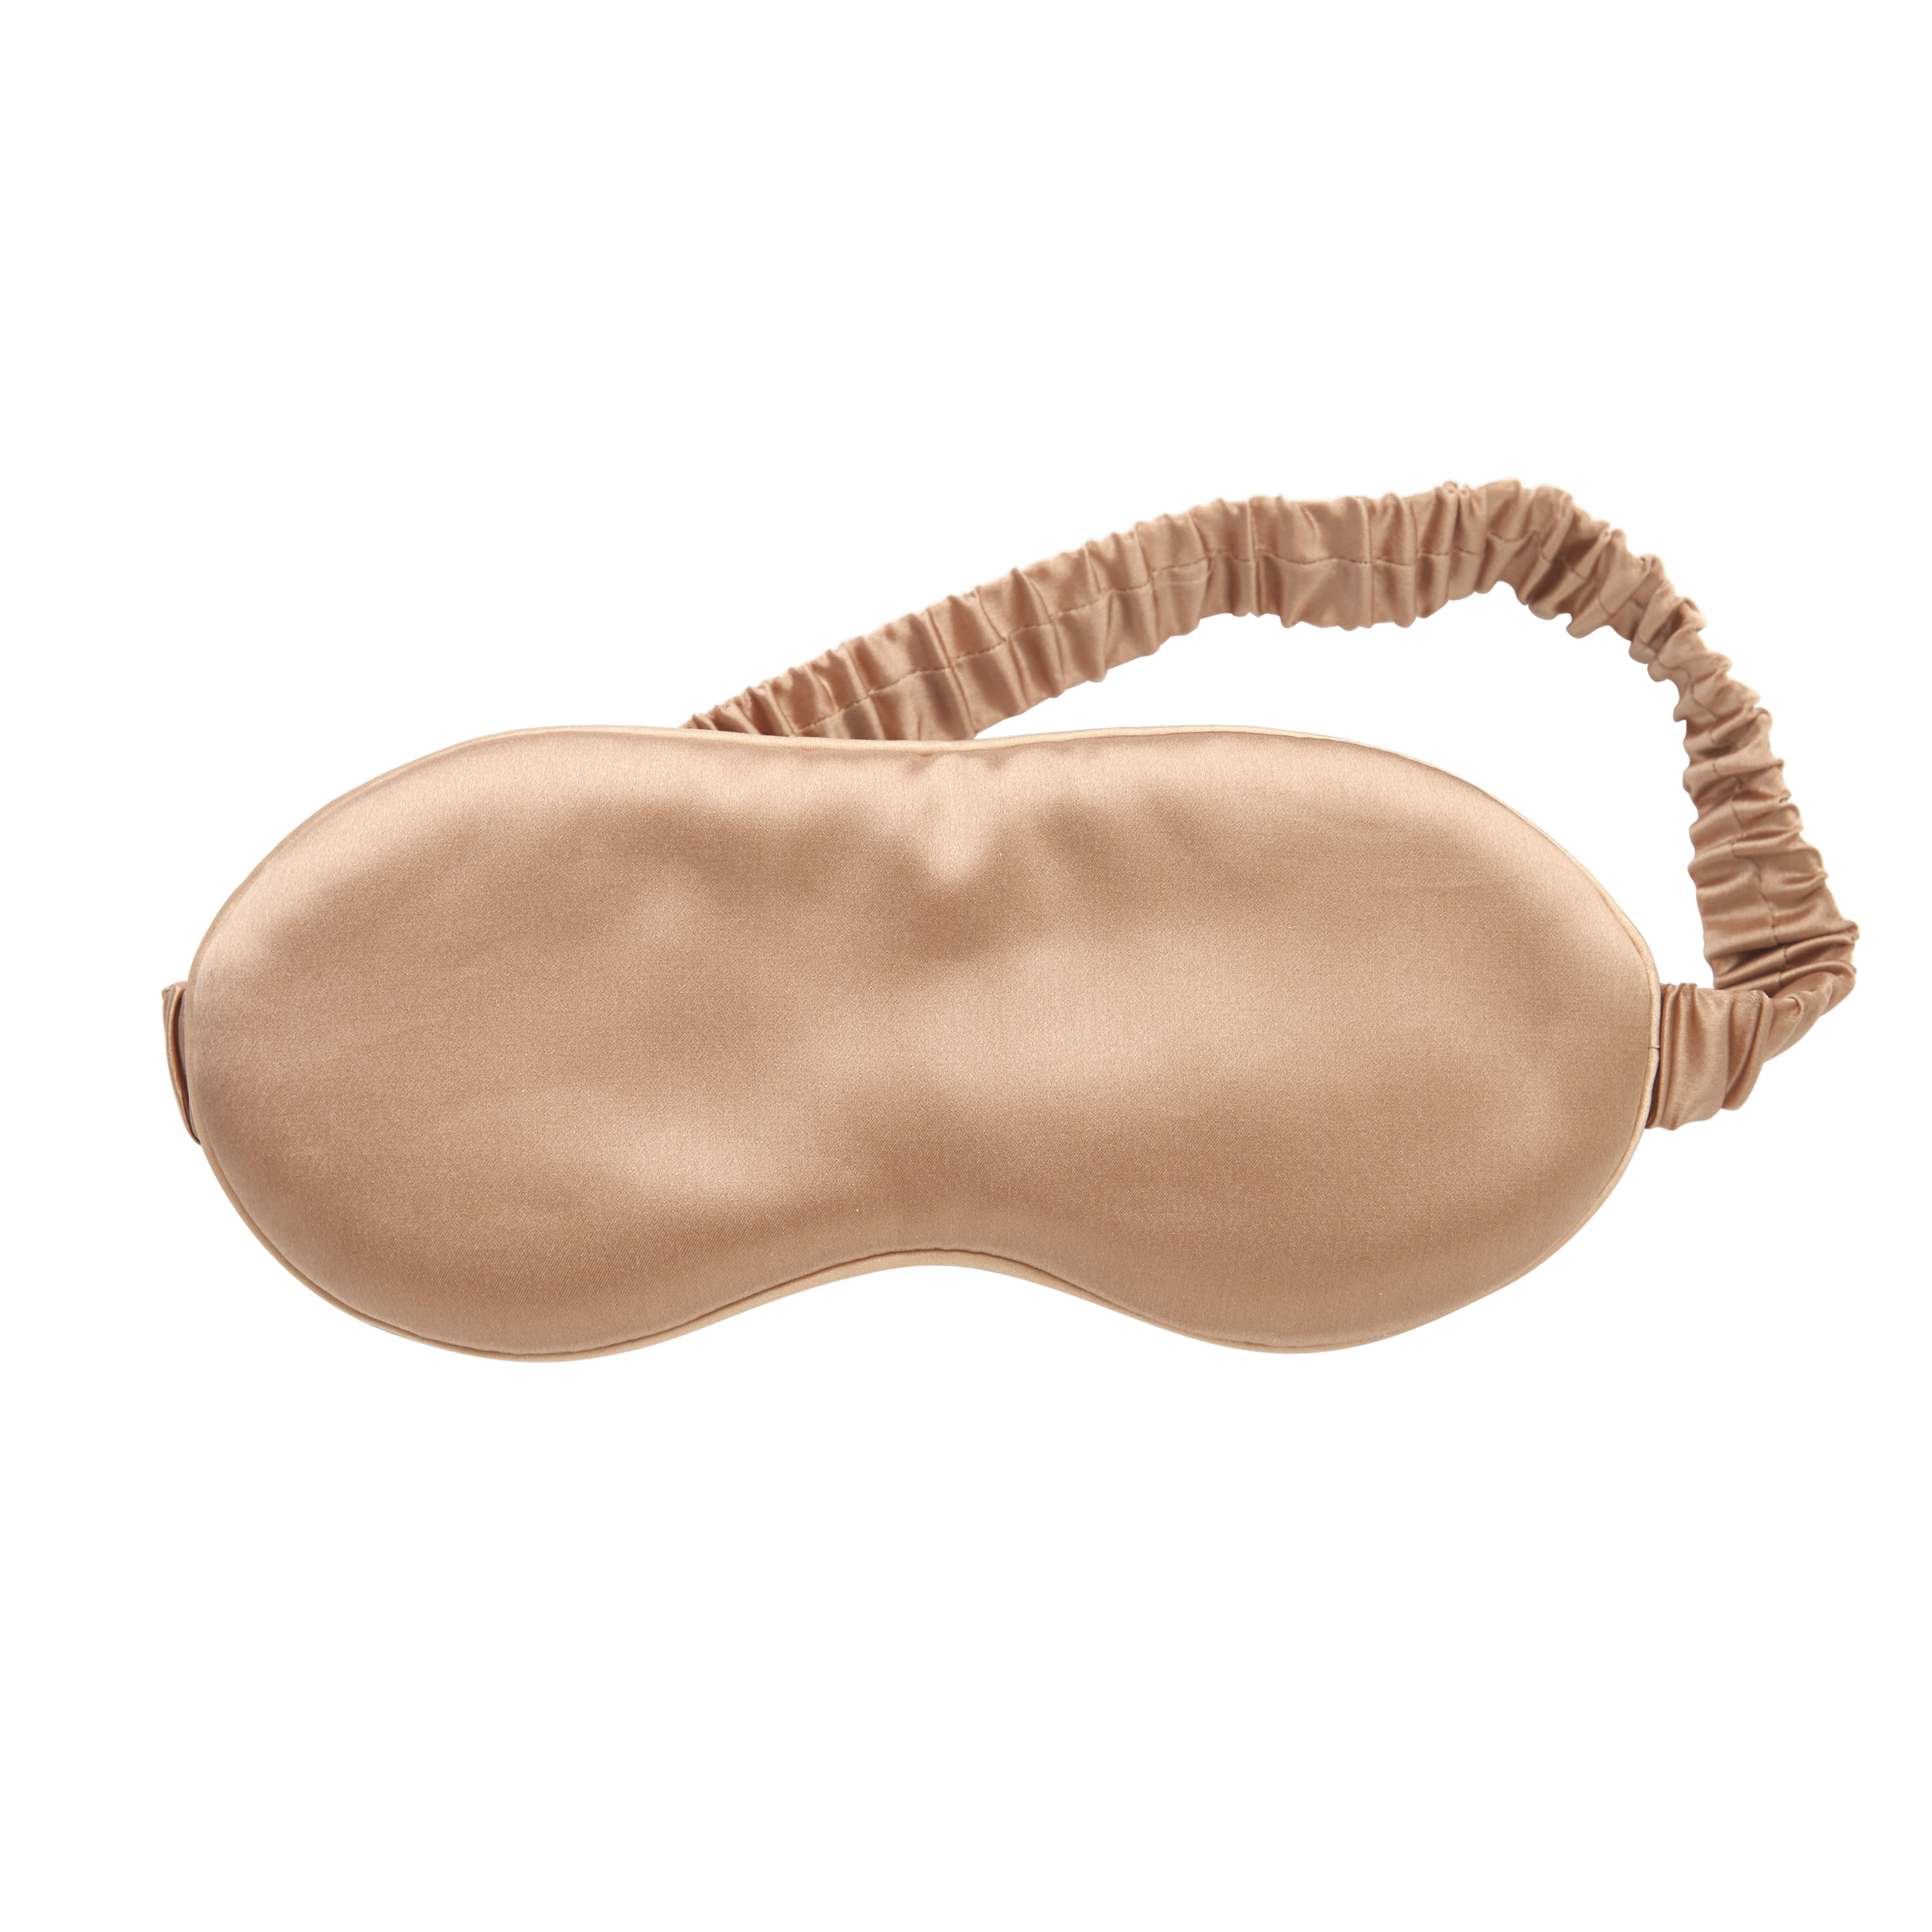 LENOITES Mulberry Sleep Mask & Pouch Rose Gold 1 st